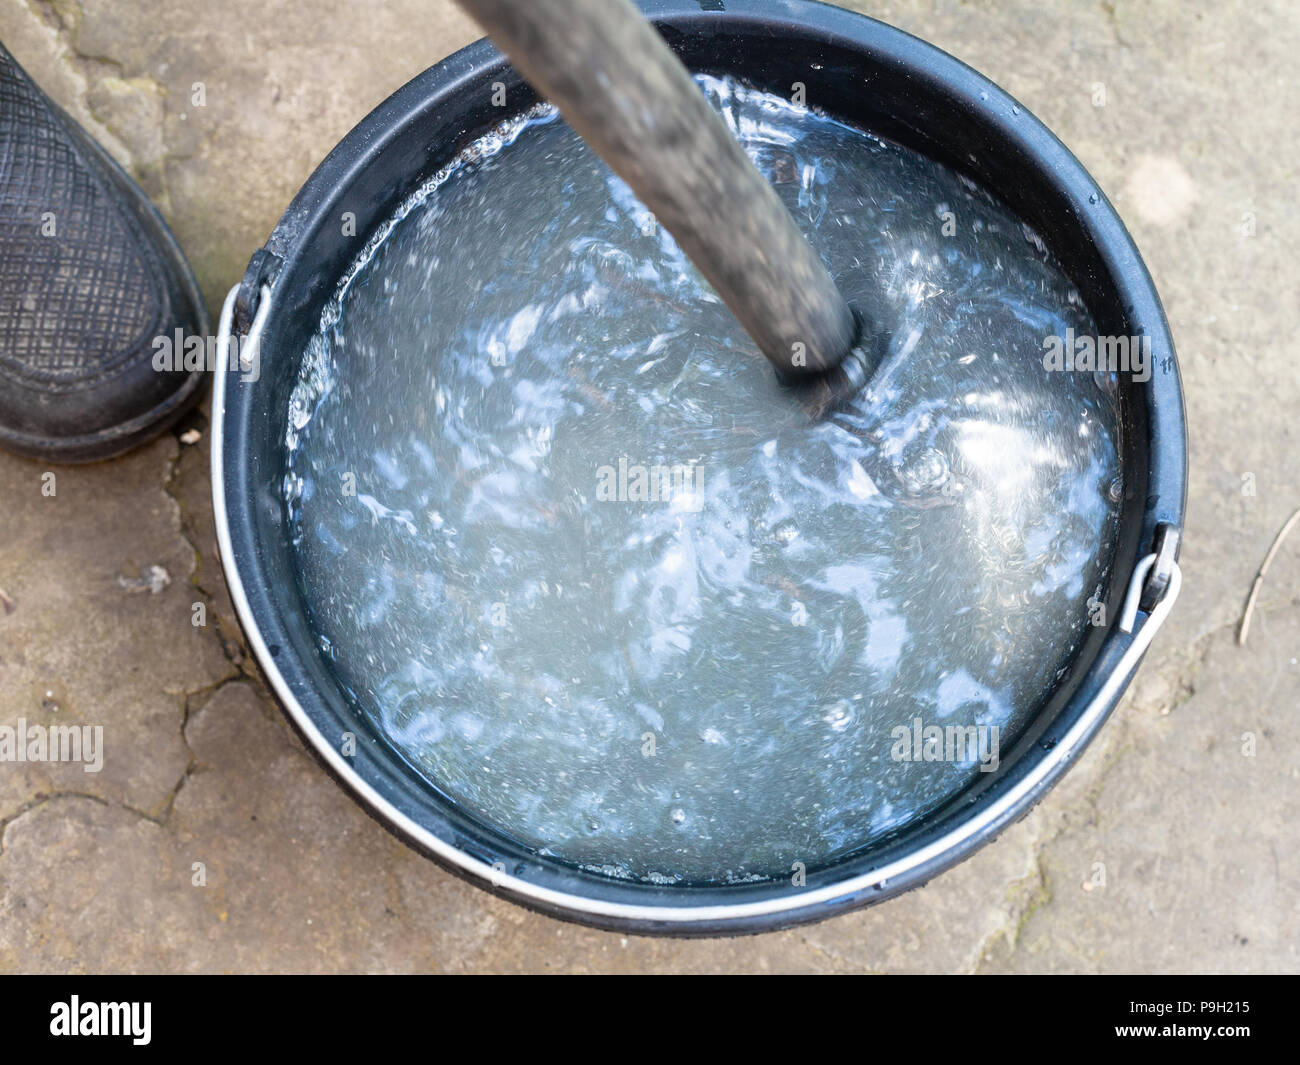 stirring the chemicals by wooden stick in bucket outdoors on backyard Stock Photo